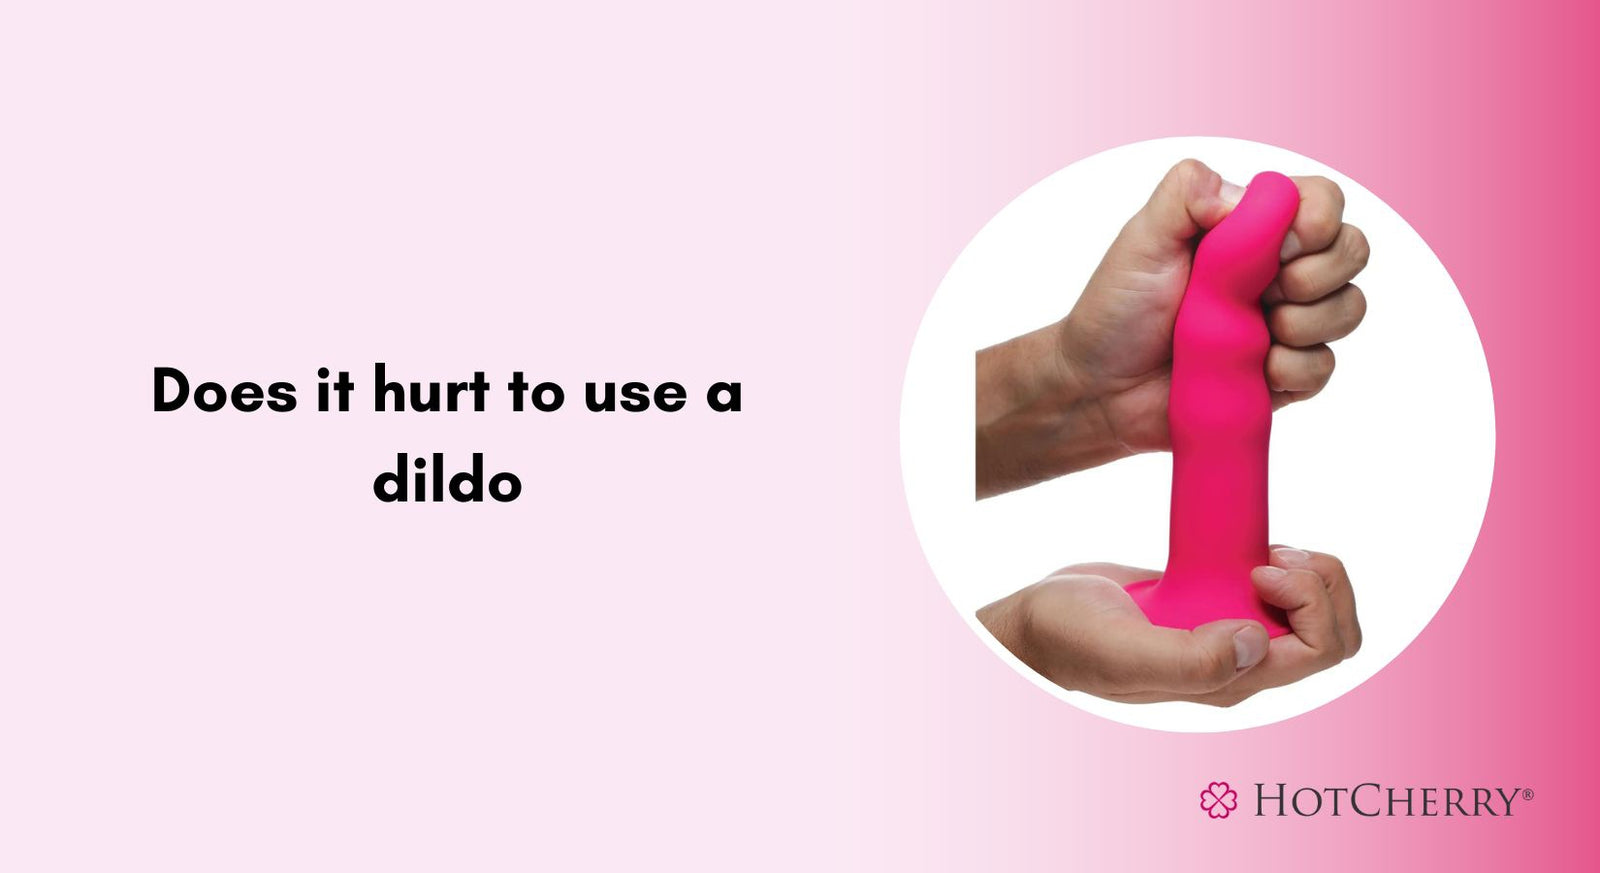 Does It Hurt to Use A Dildo?